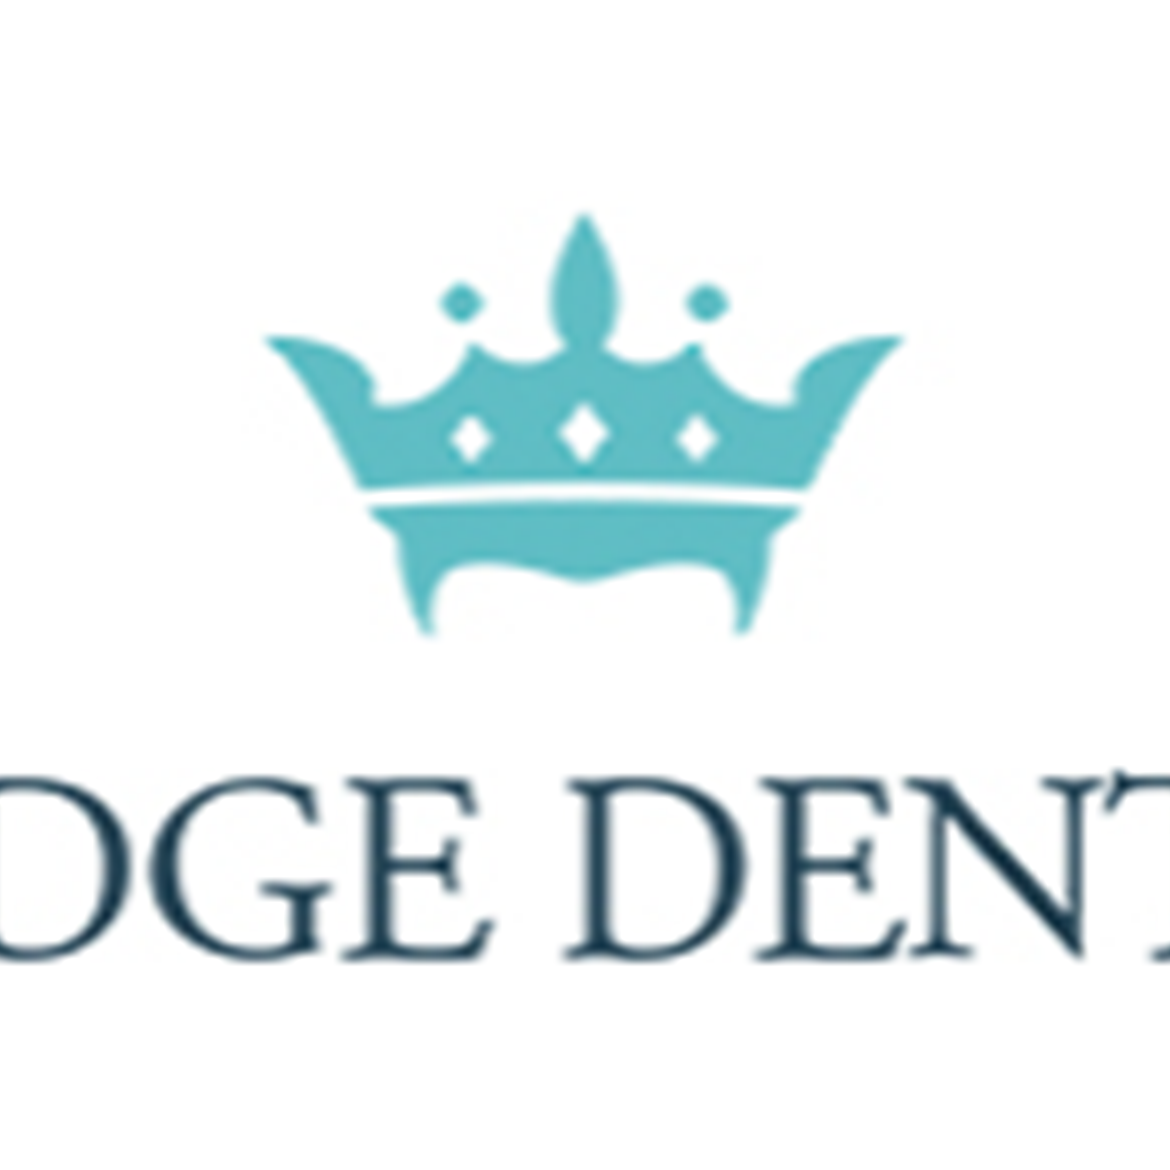 Lodge Dental - The science of your smile.